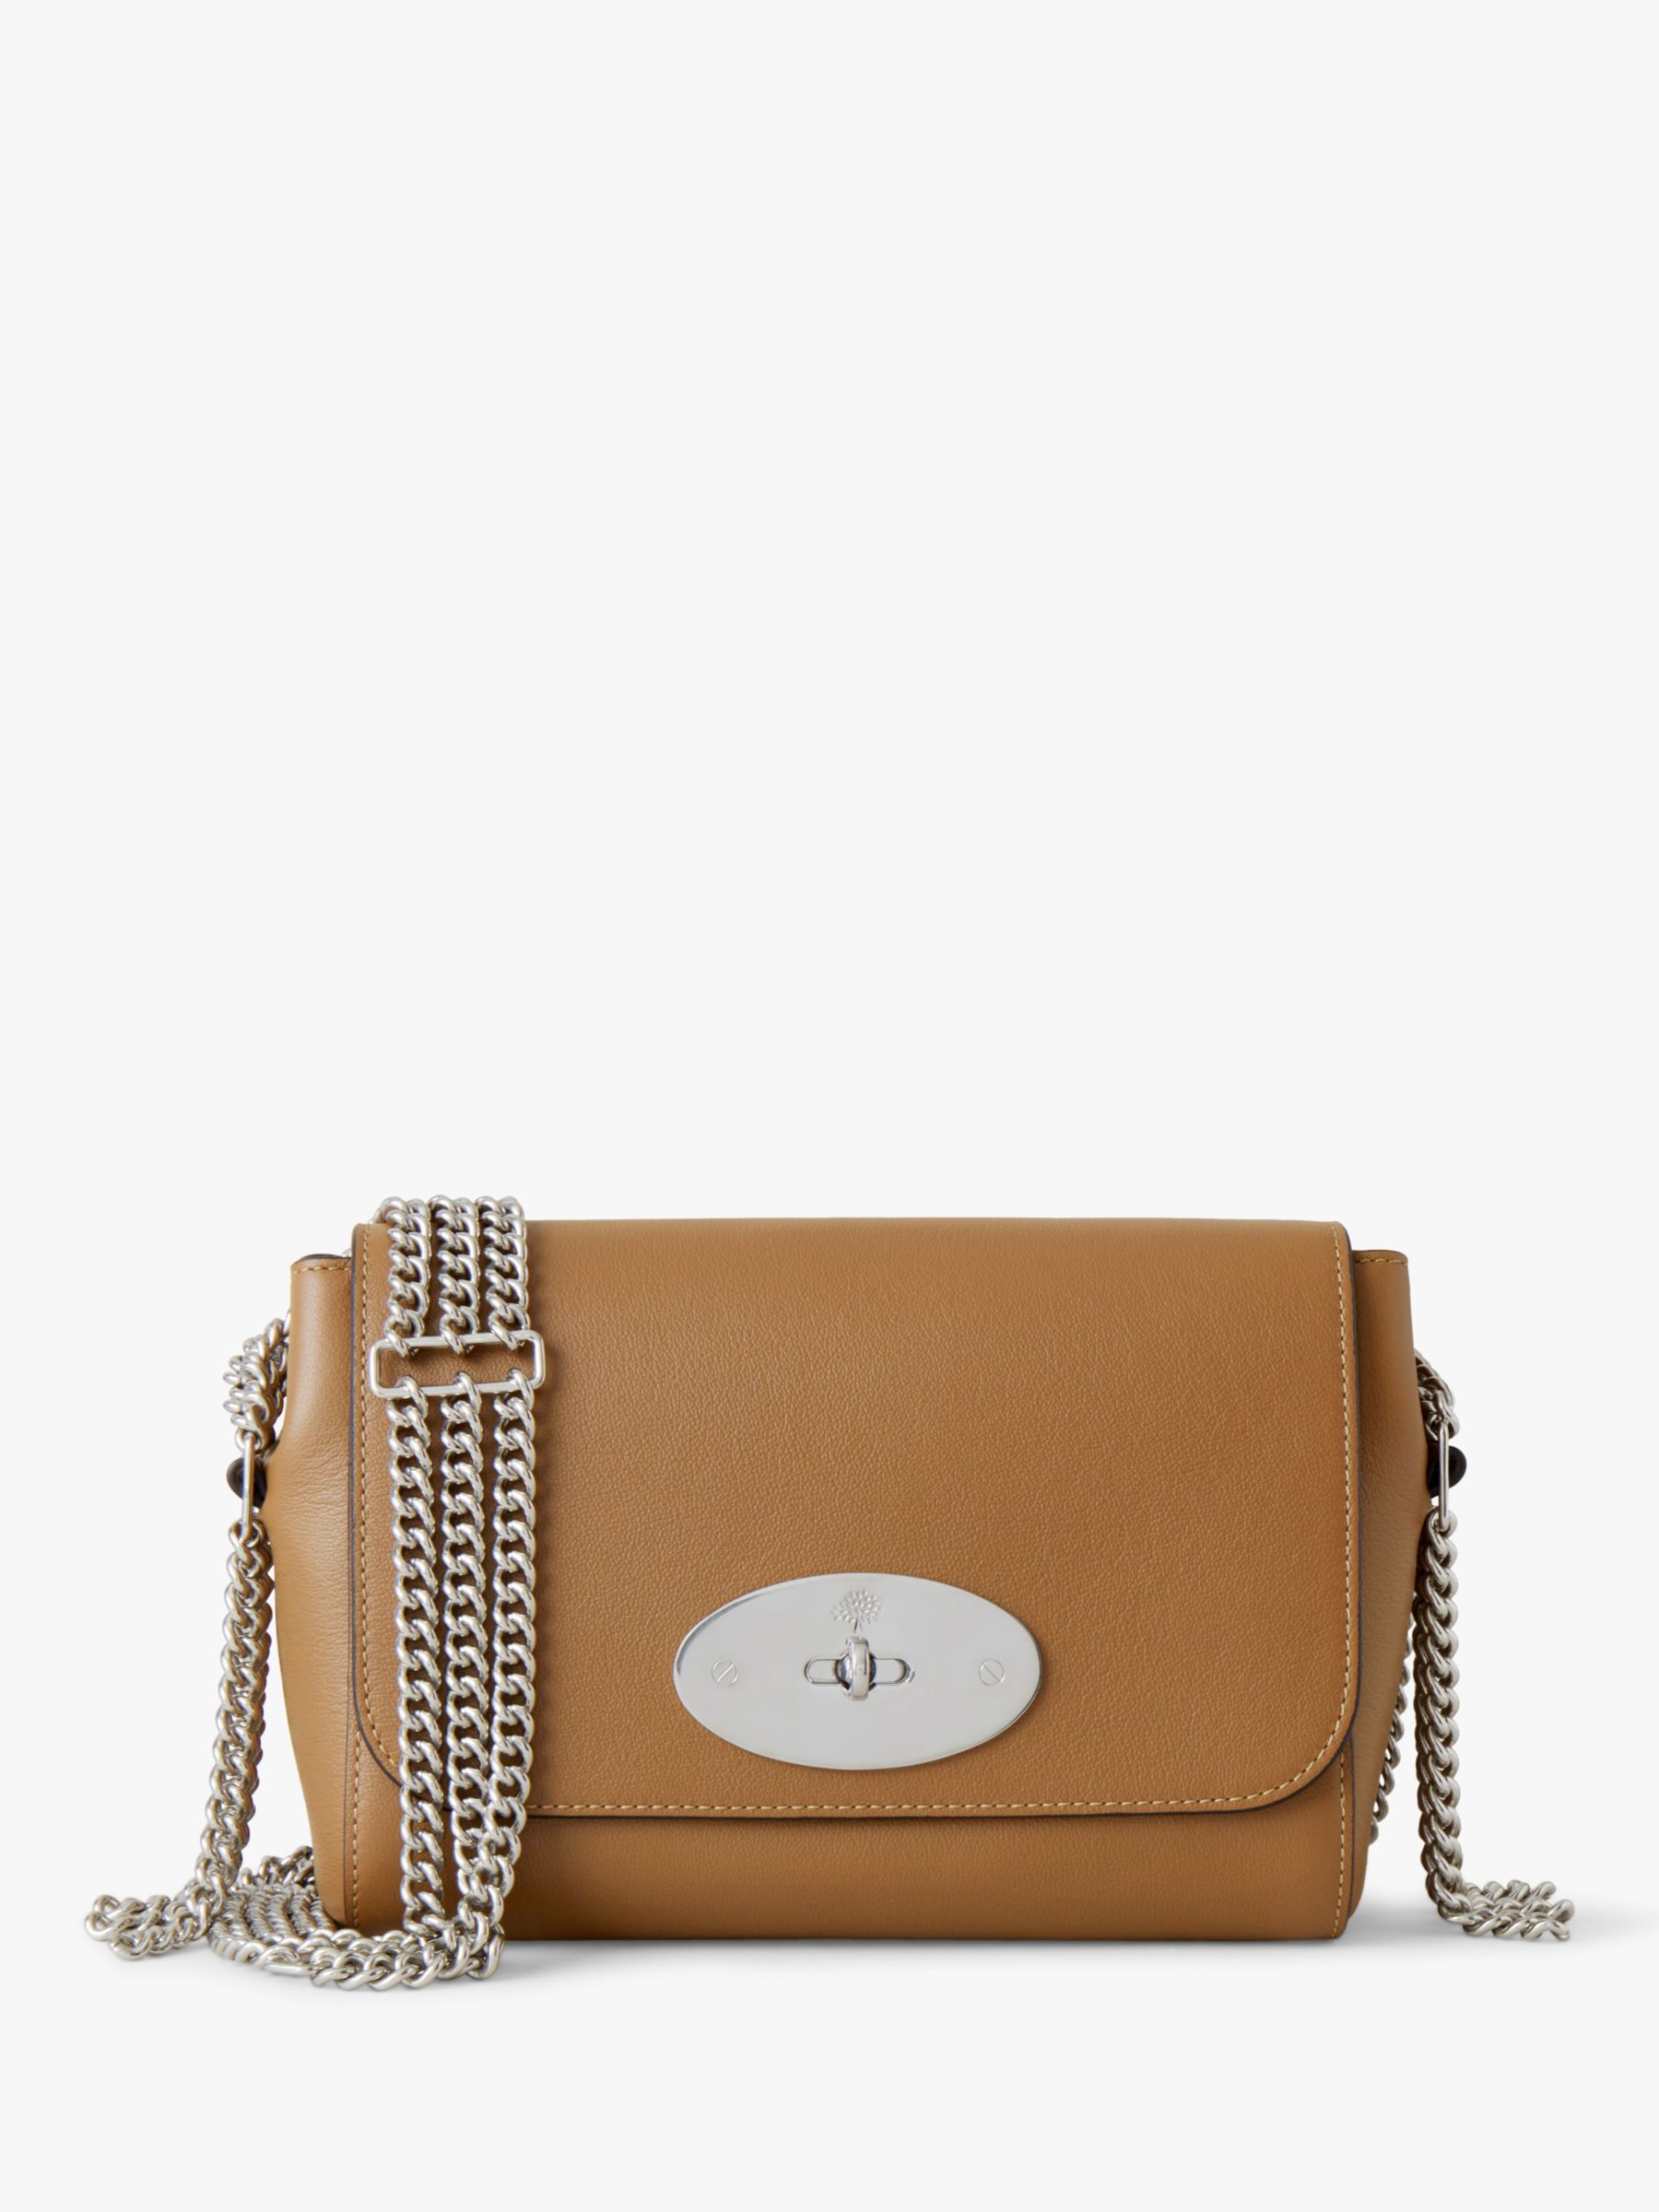 Mulberry Triple Chain Lily Leather Shoulder Bag, Teak